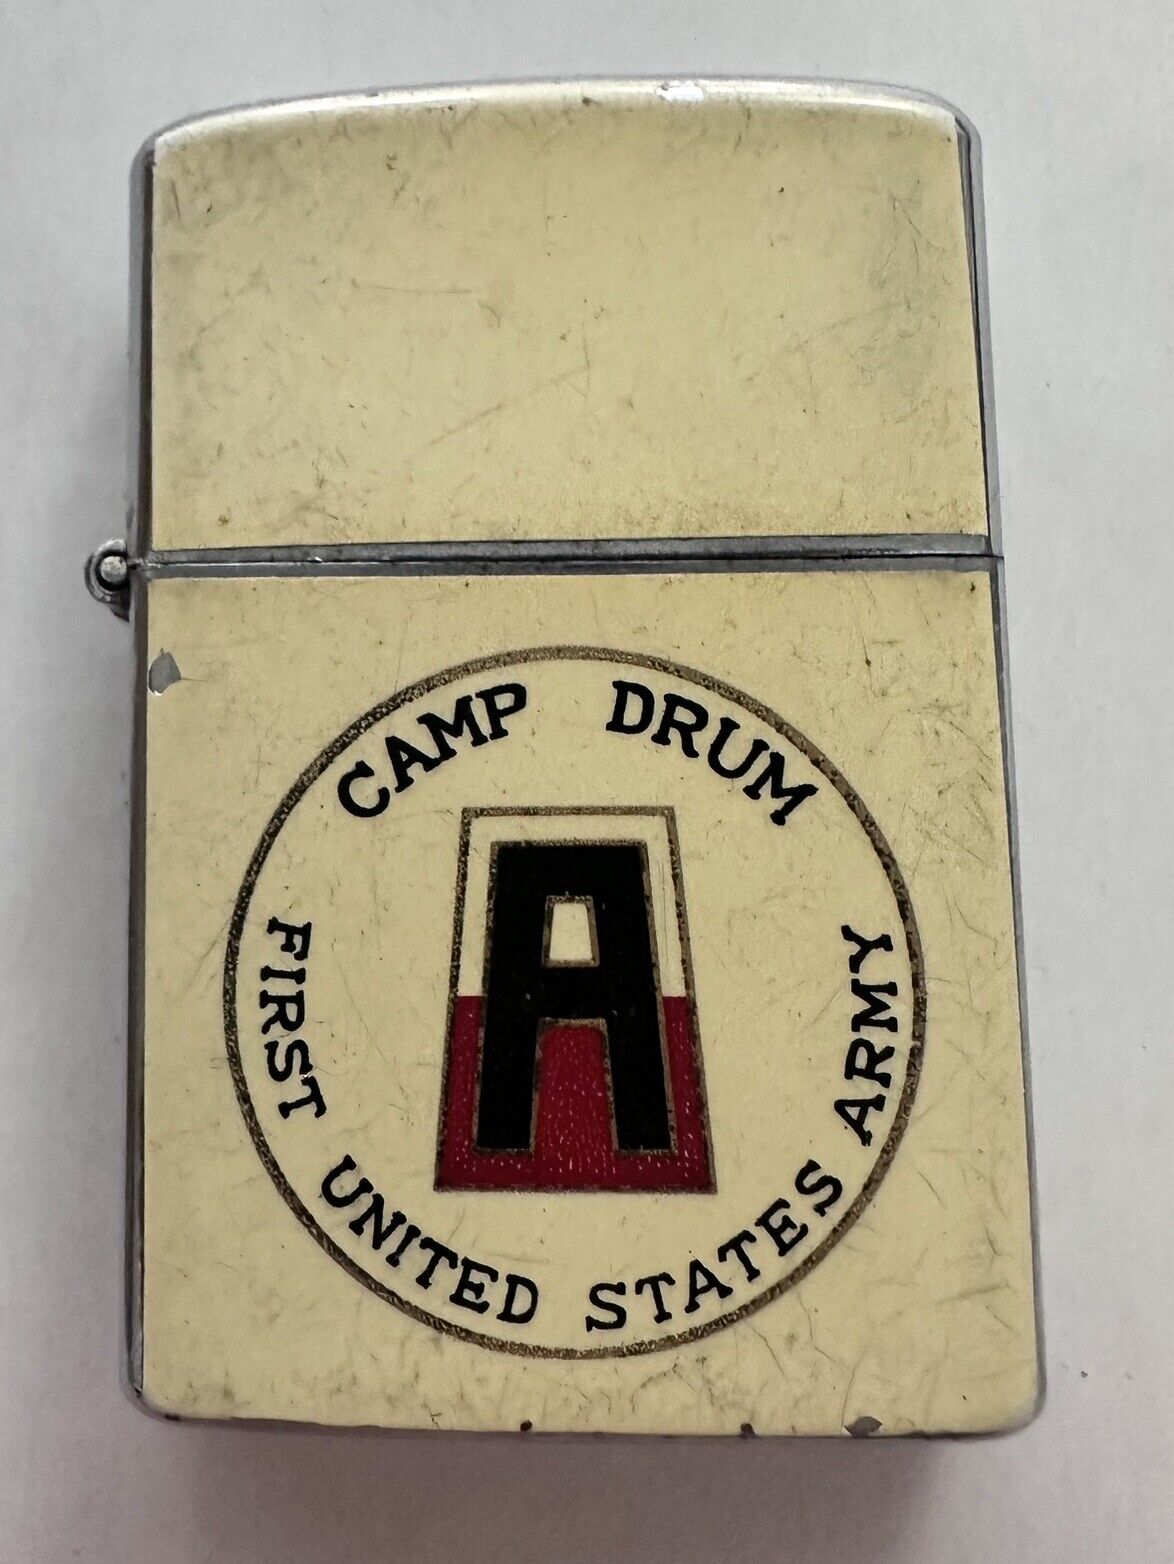 Camp Drum New York First United States Army Cream & Silver Lighter